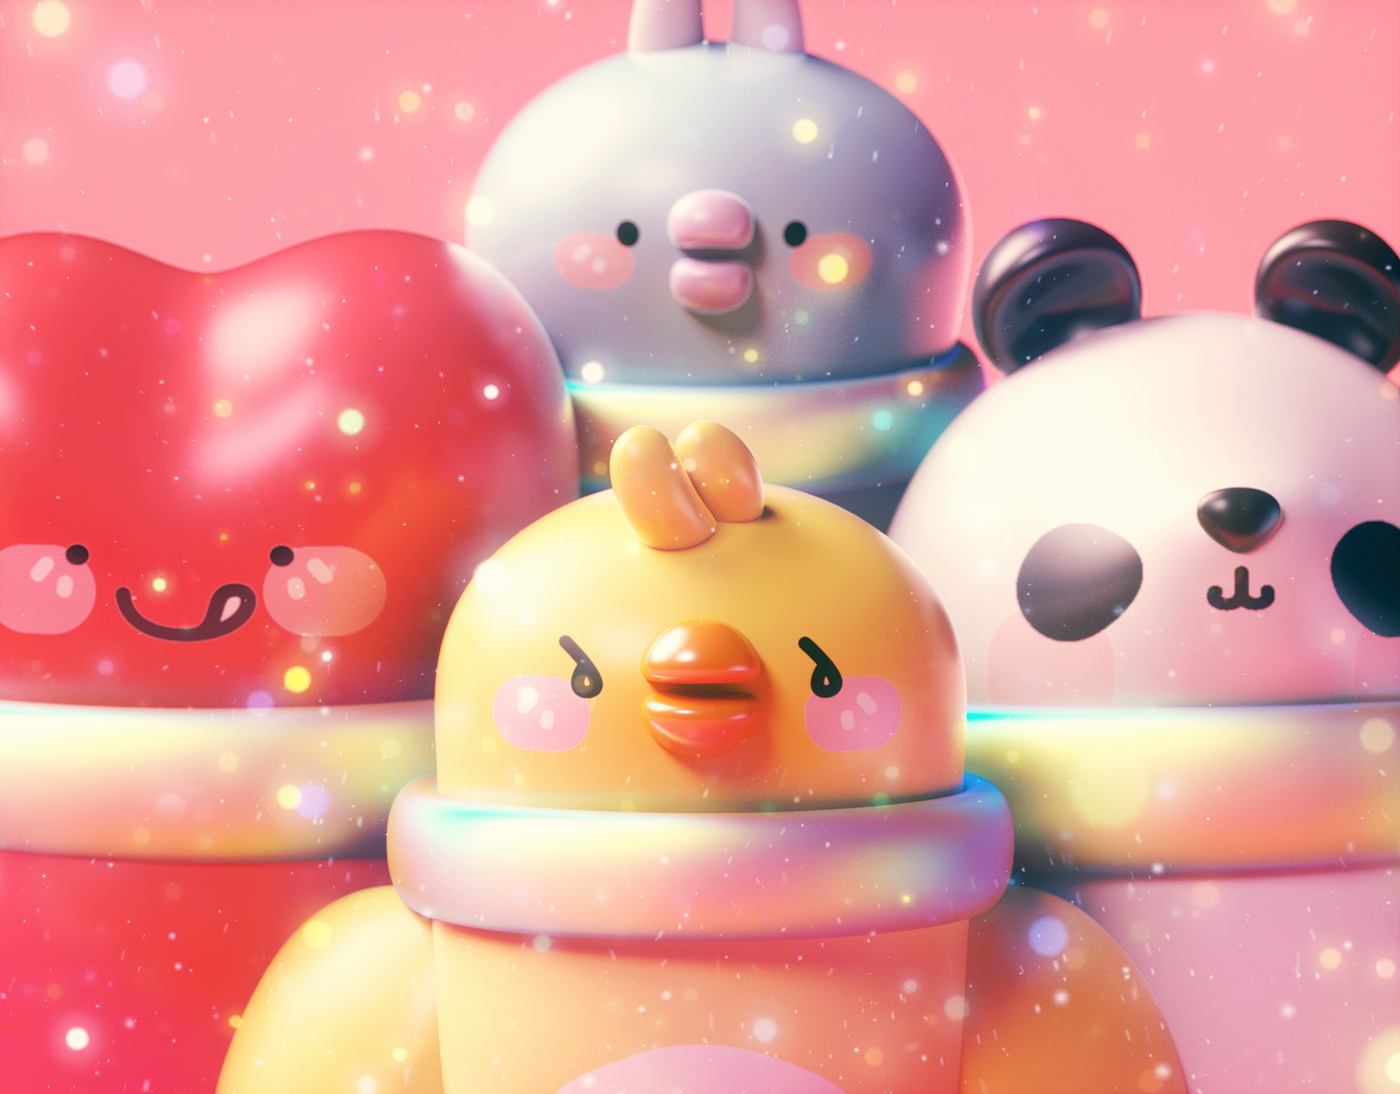 artwork c4d characters cinema4d Cosmetic cute illust motion photoshop toy